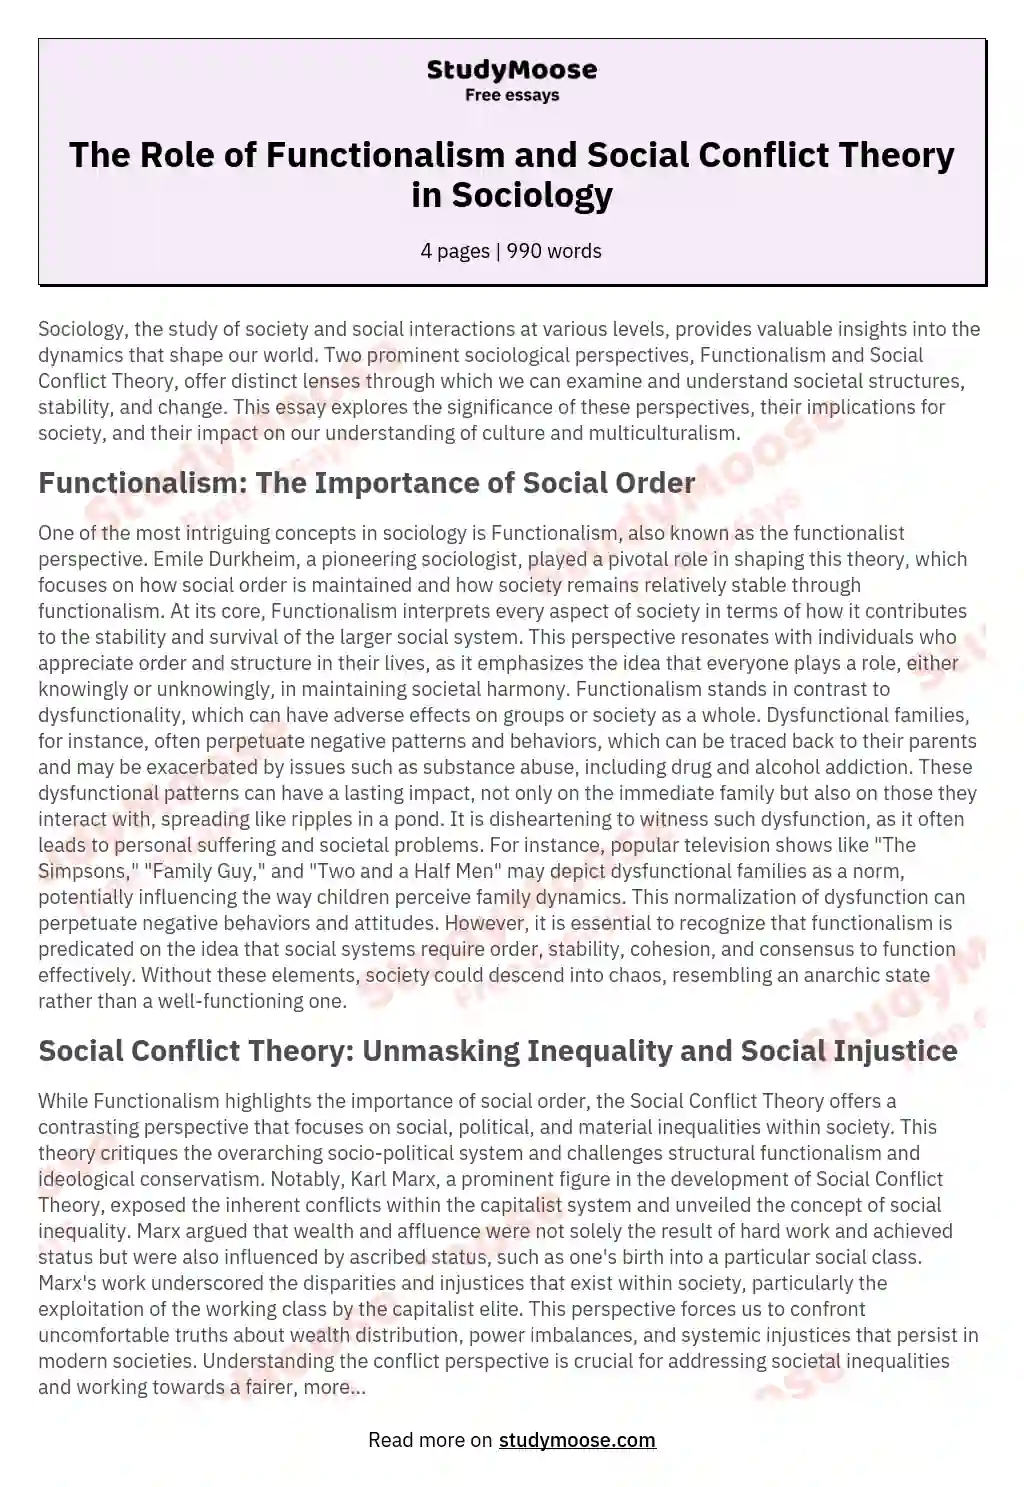 conflict perspective in sociology essay